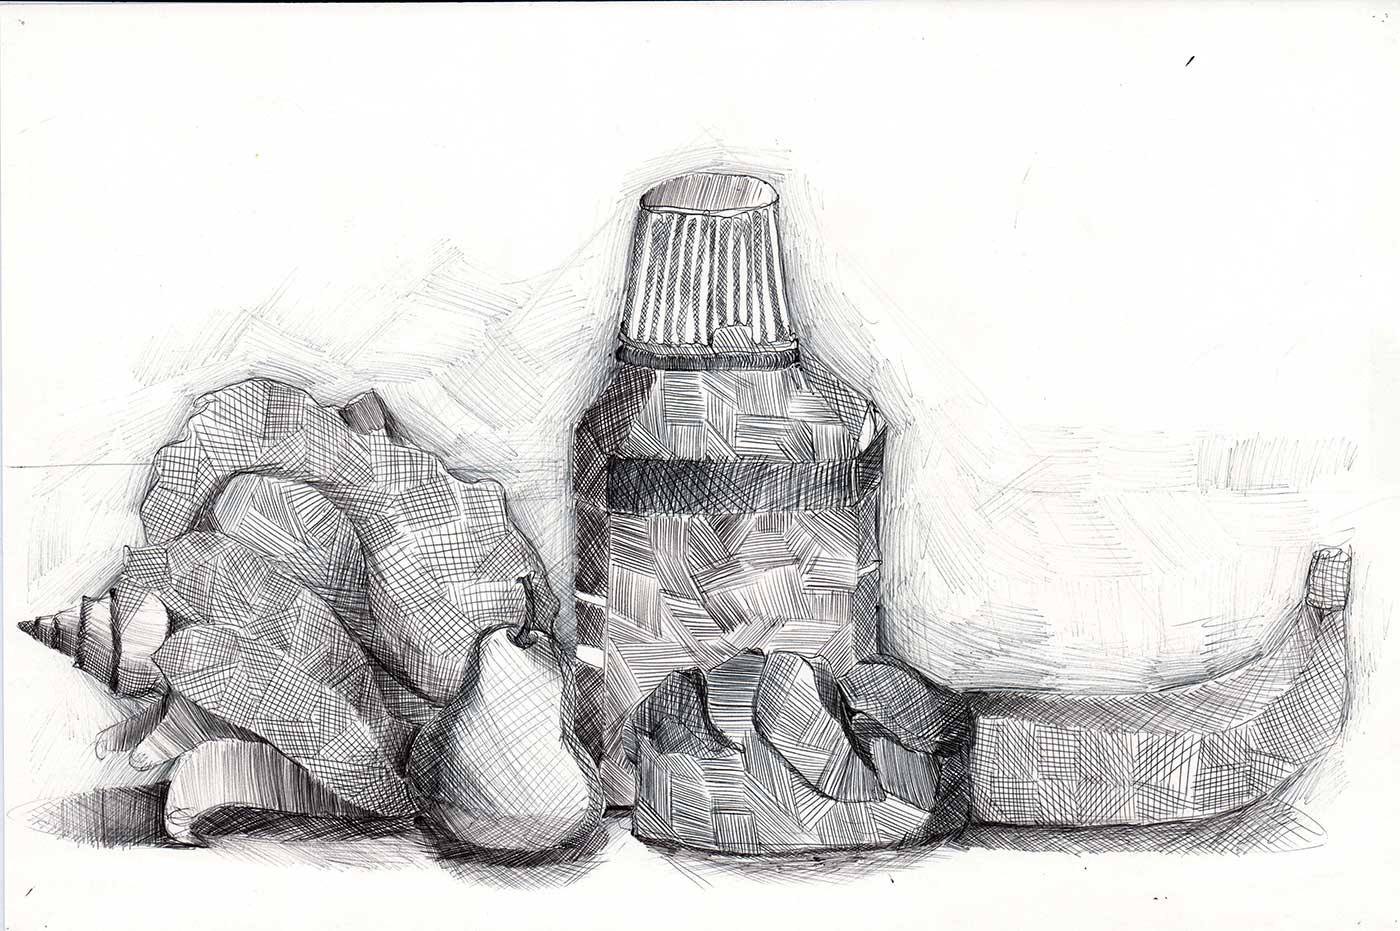 still life drawing of a bottle and fruit.